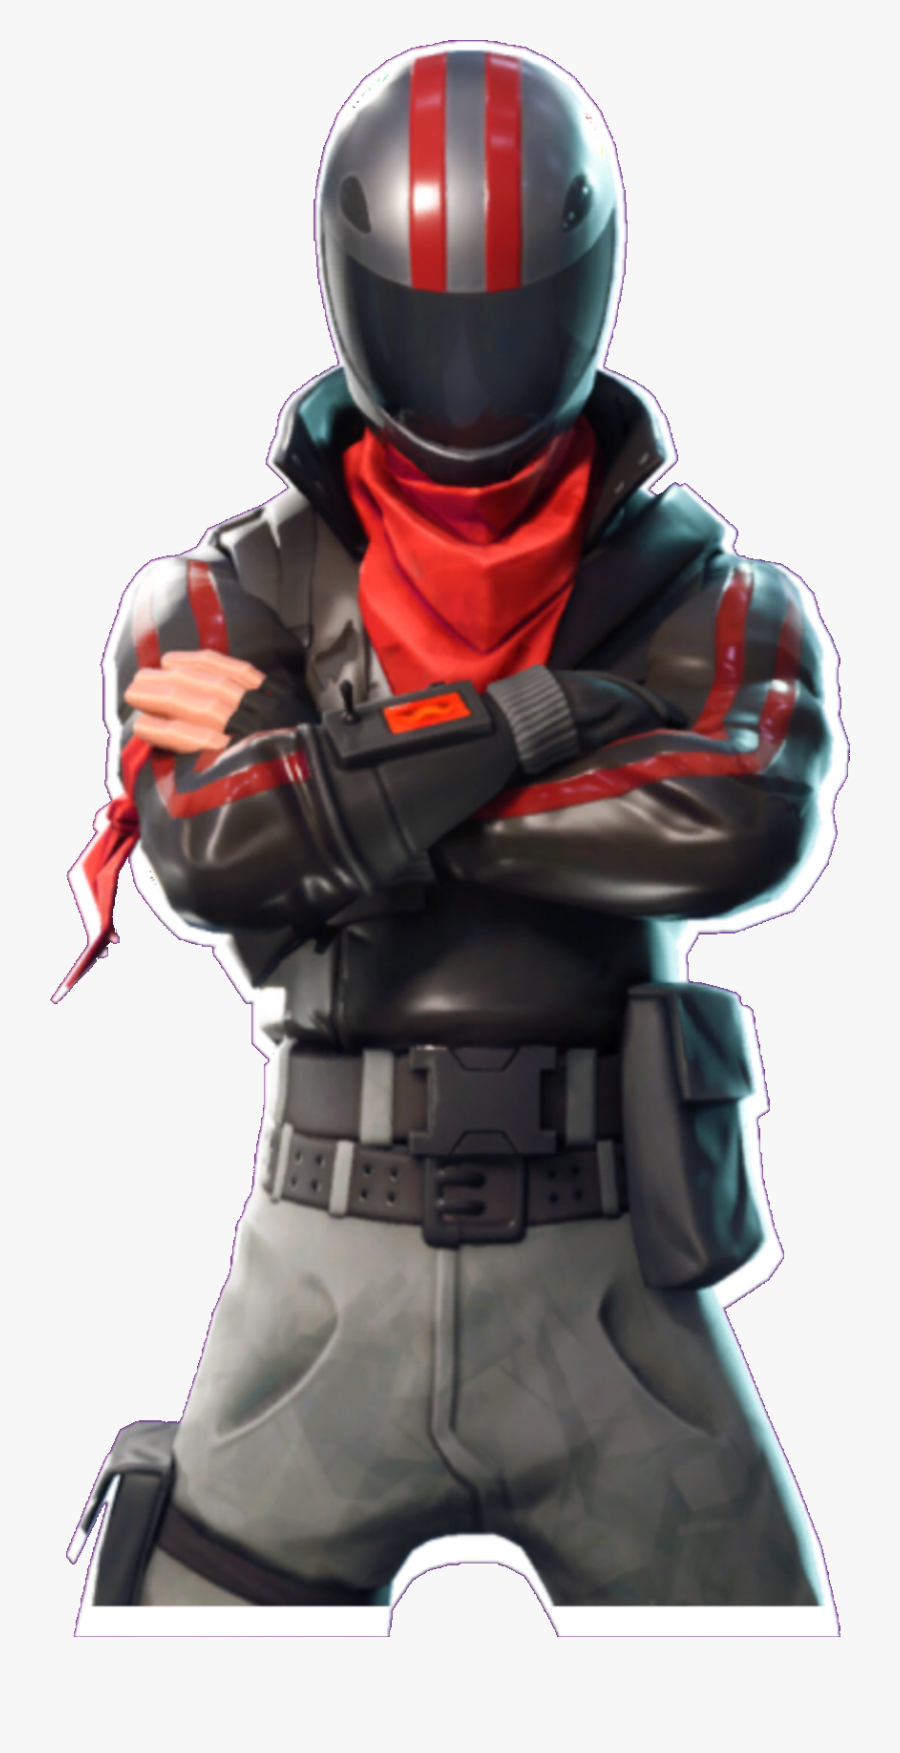 Burnout With White Outline - Skin Fortnite Png, Transparent Clipart